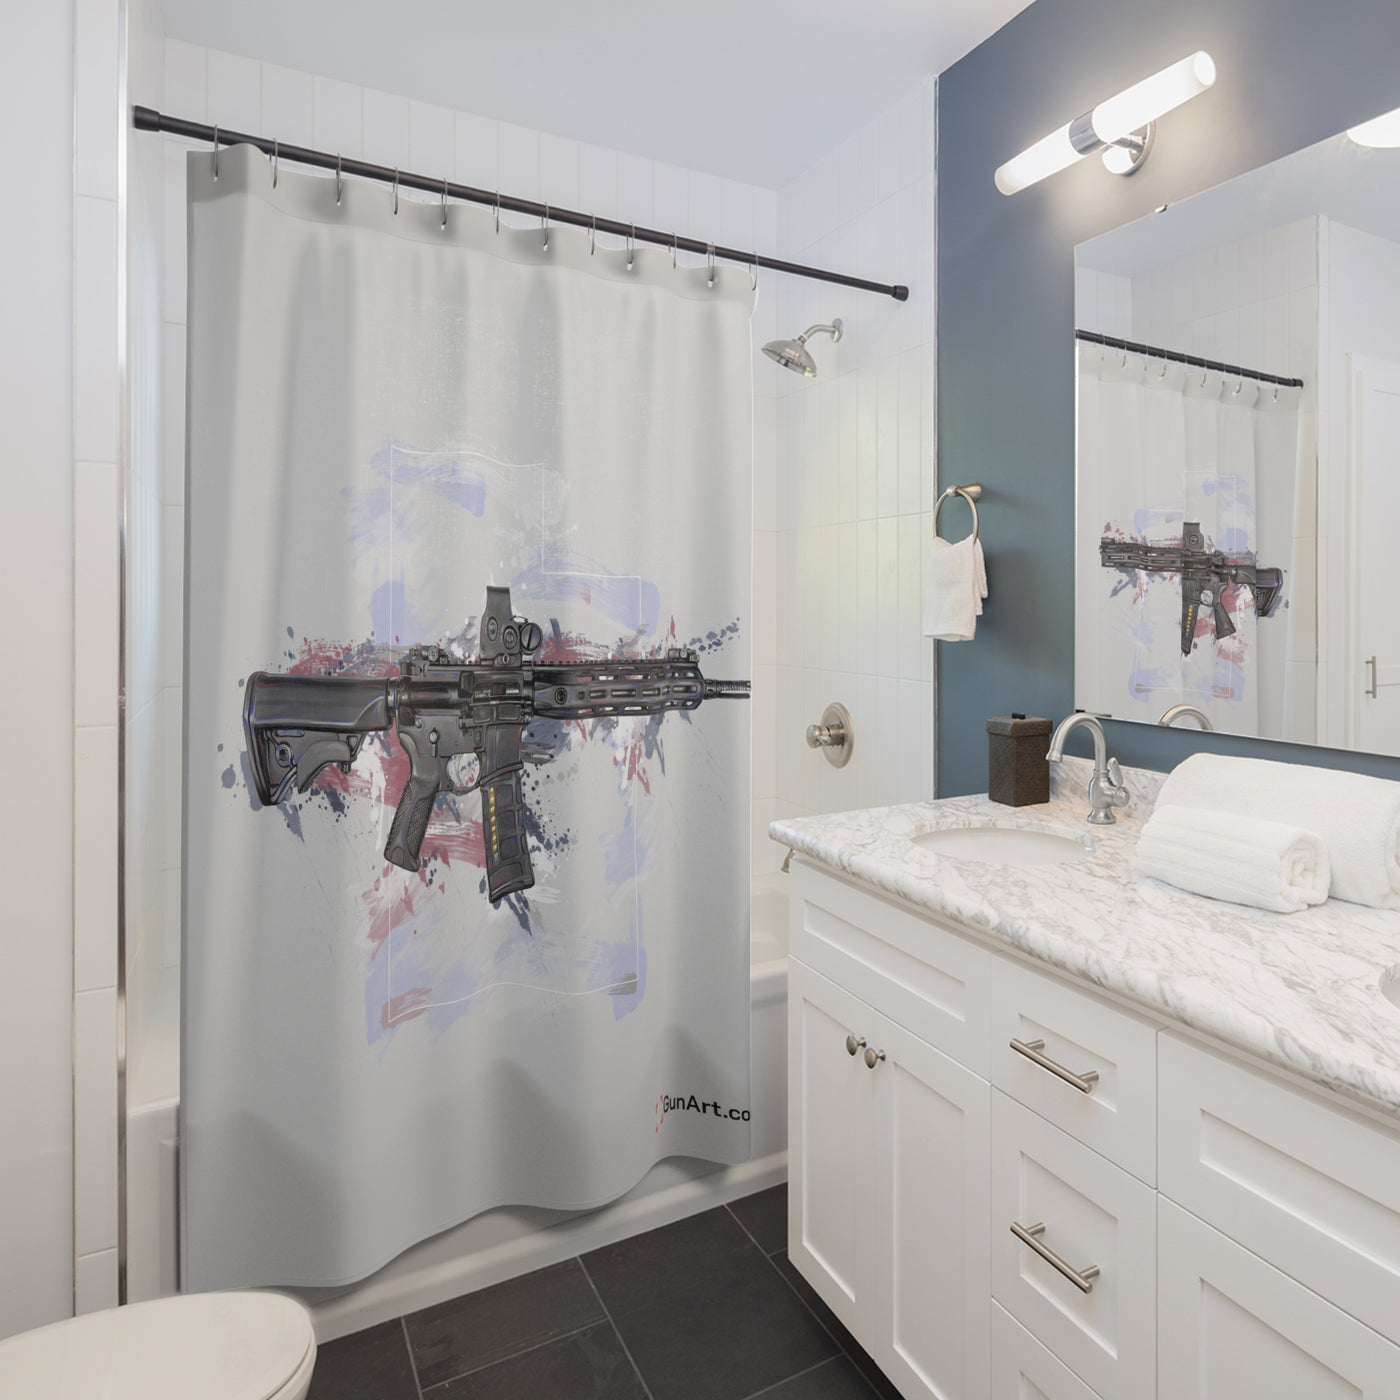 Defending Freedom - Utah - AR-15 State Shower Curtains - White State